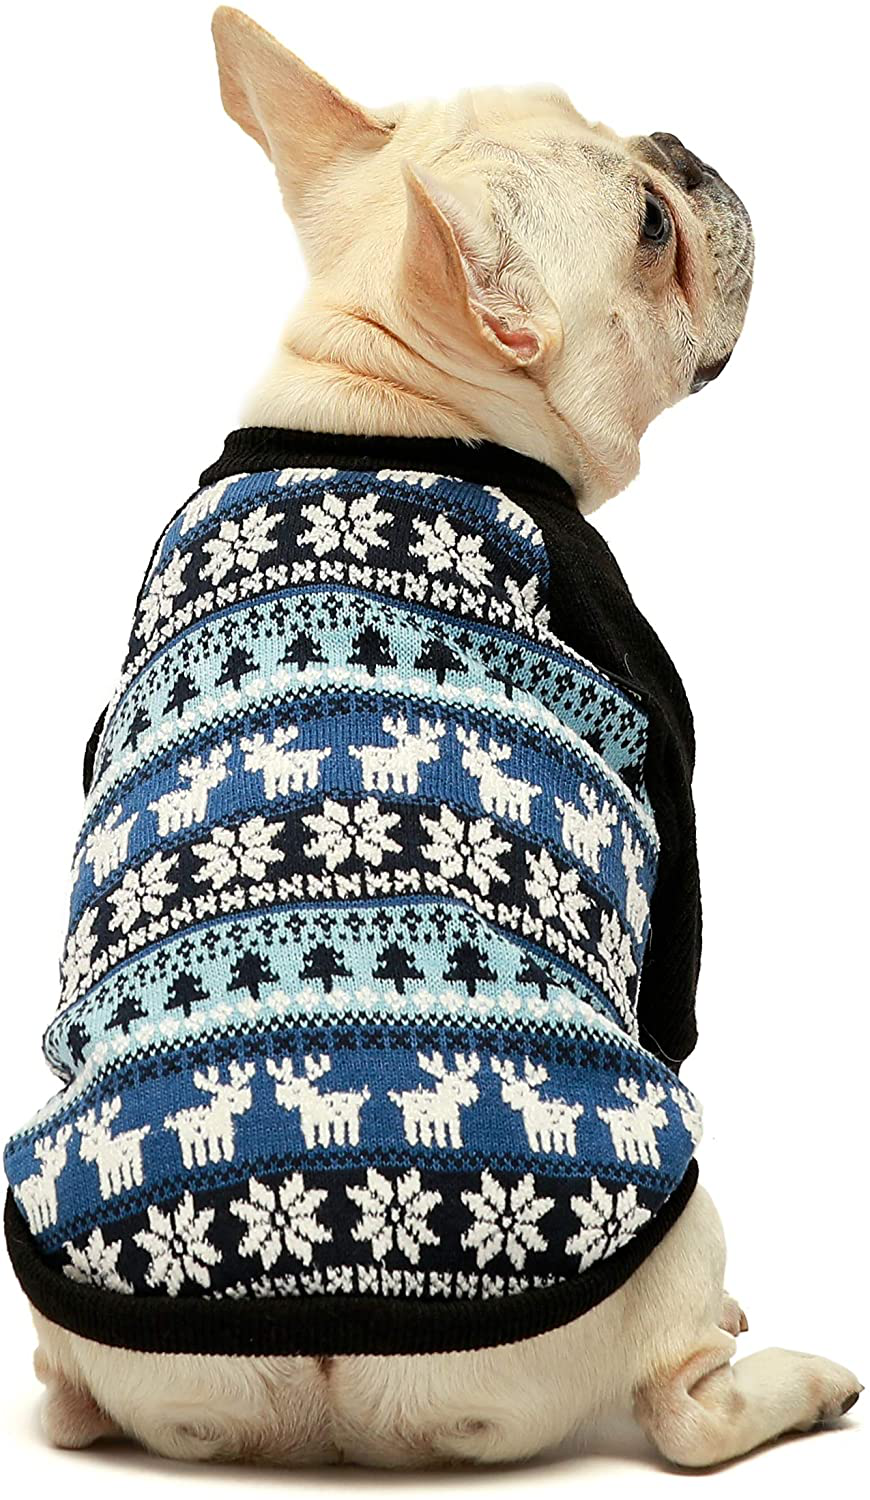 Fitwarm Dog Winter Sweater Knitwear Greygrids Pet Winter Clothes Doggie Outifts Thermal Clothes Grey